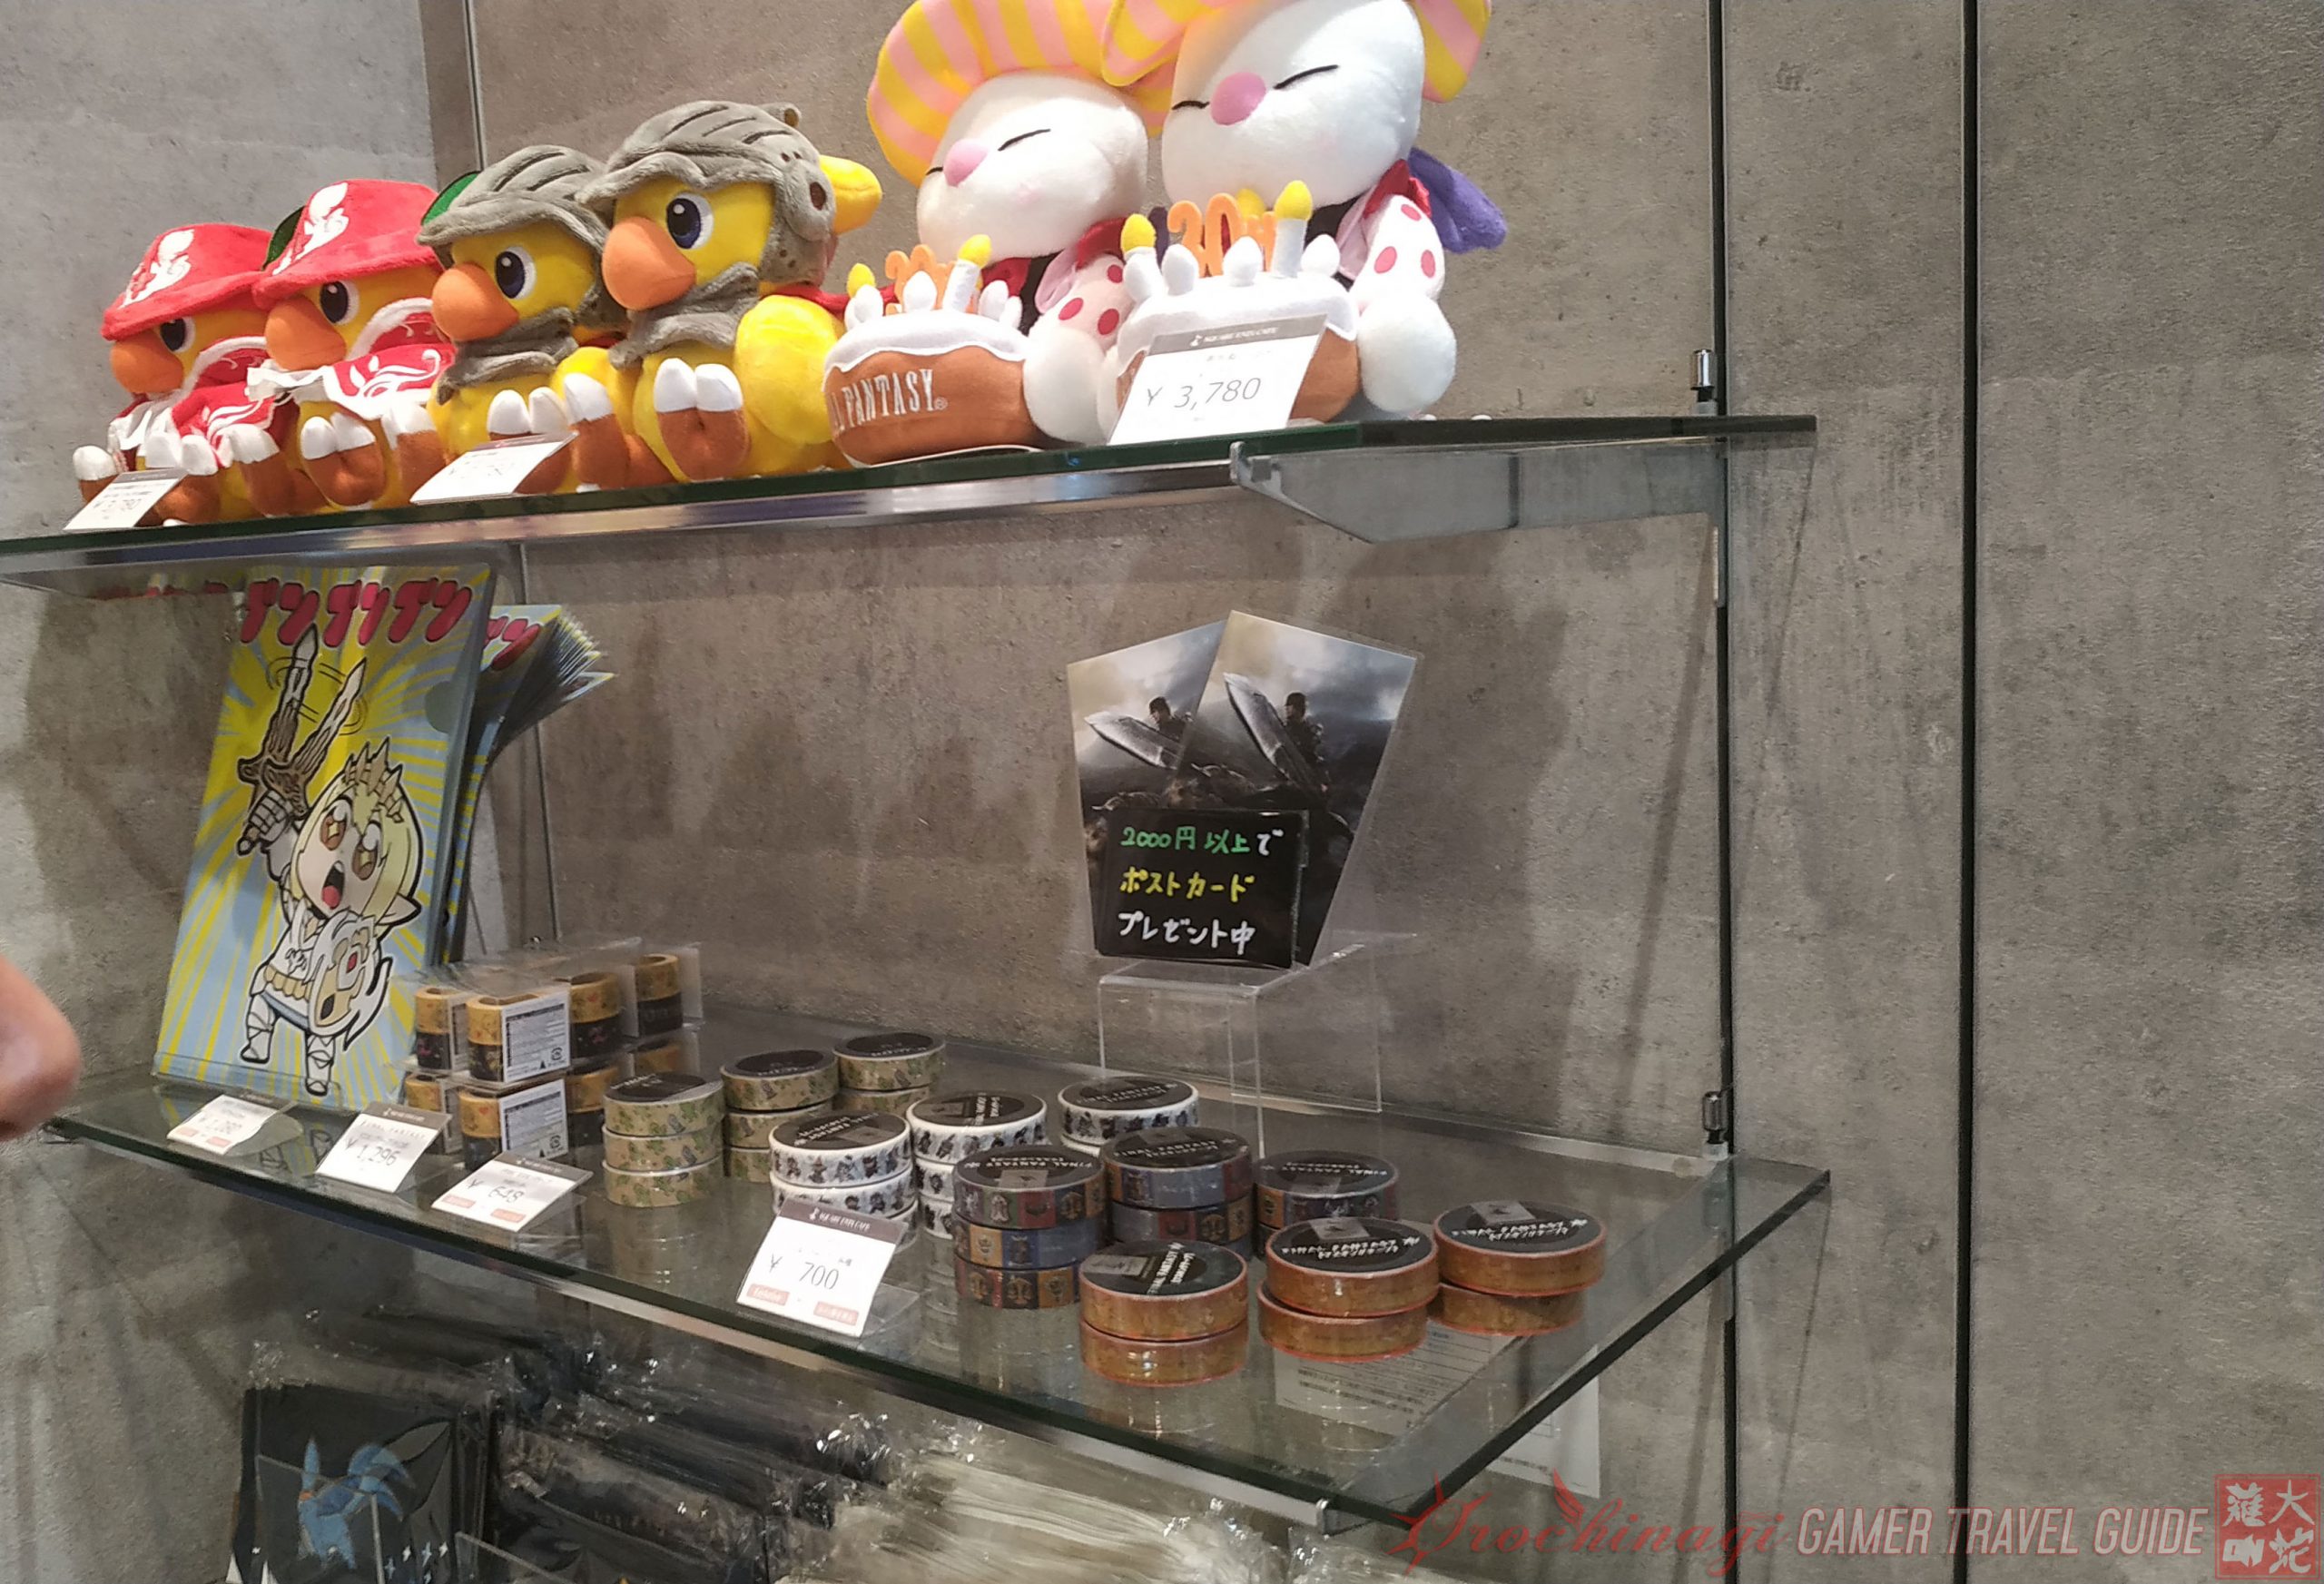 Square Enix Cafe Opens In China – NintendoSoup